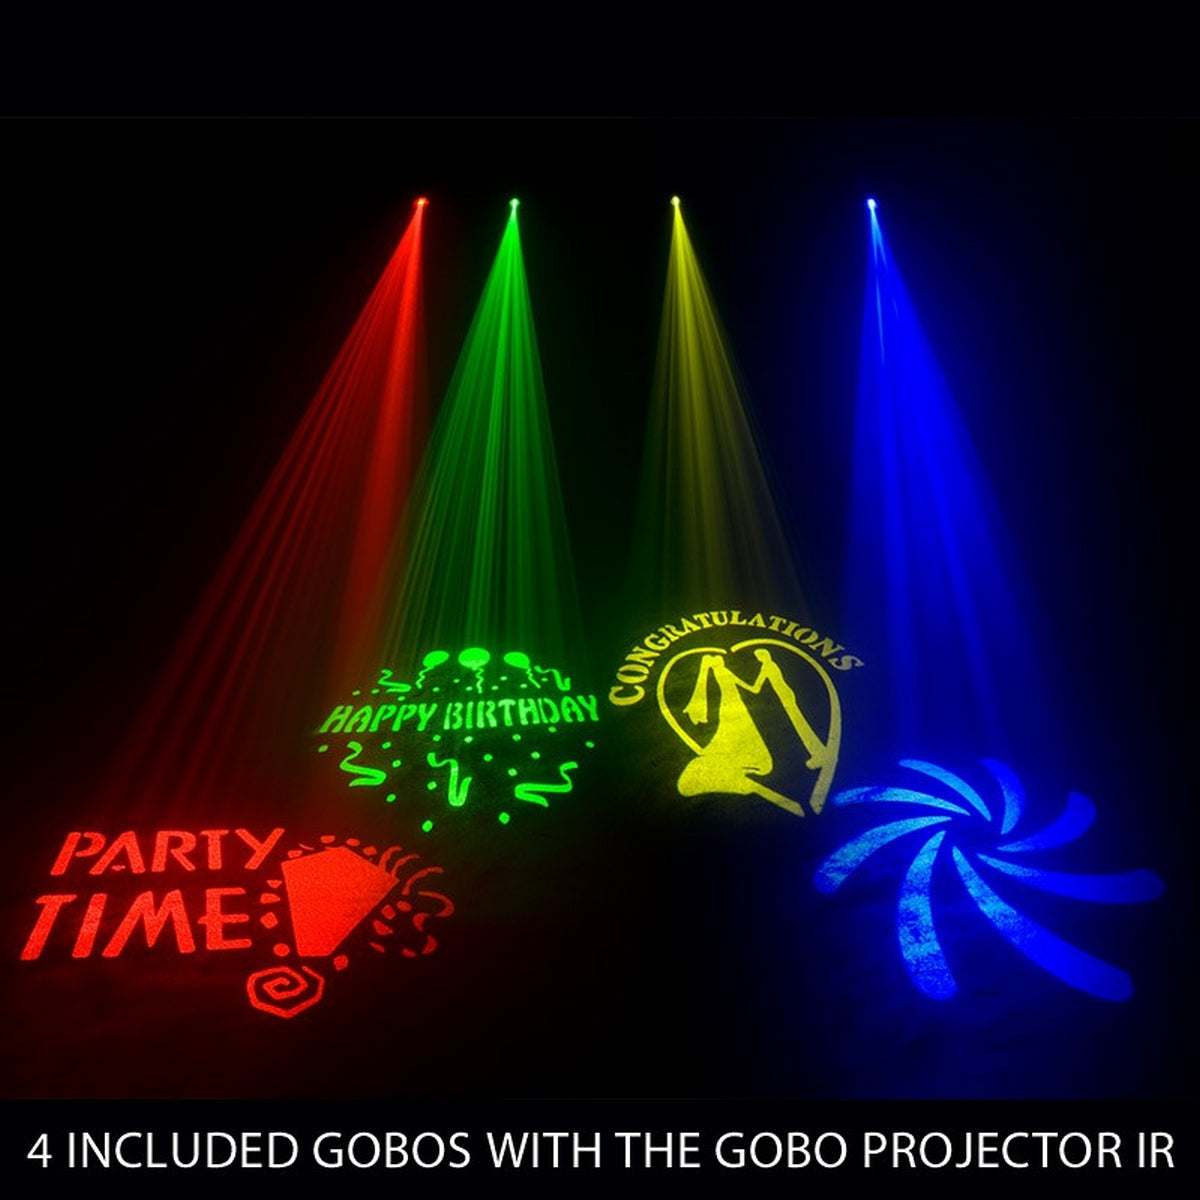 ADJ GOBO PROJECTOR IR LED Projector with 4 GOBO Patterns (Used)